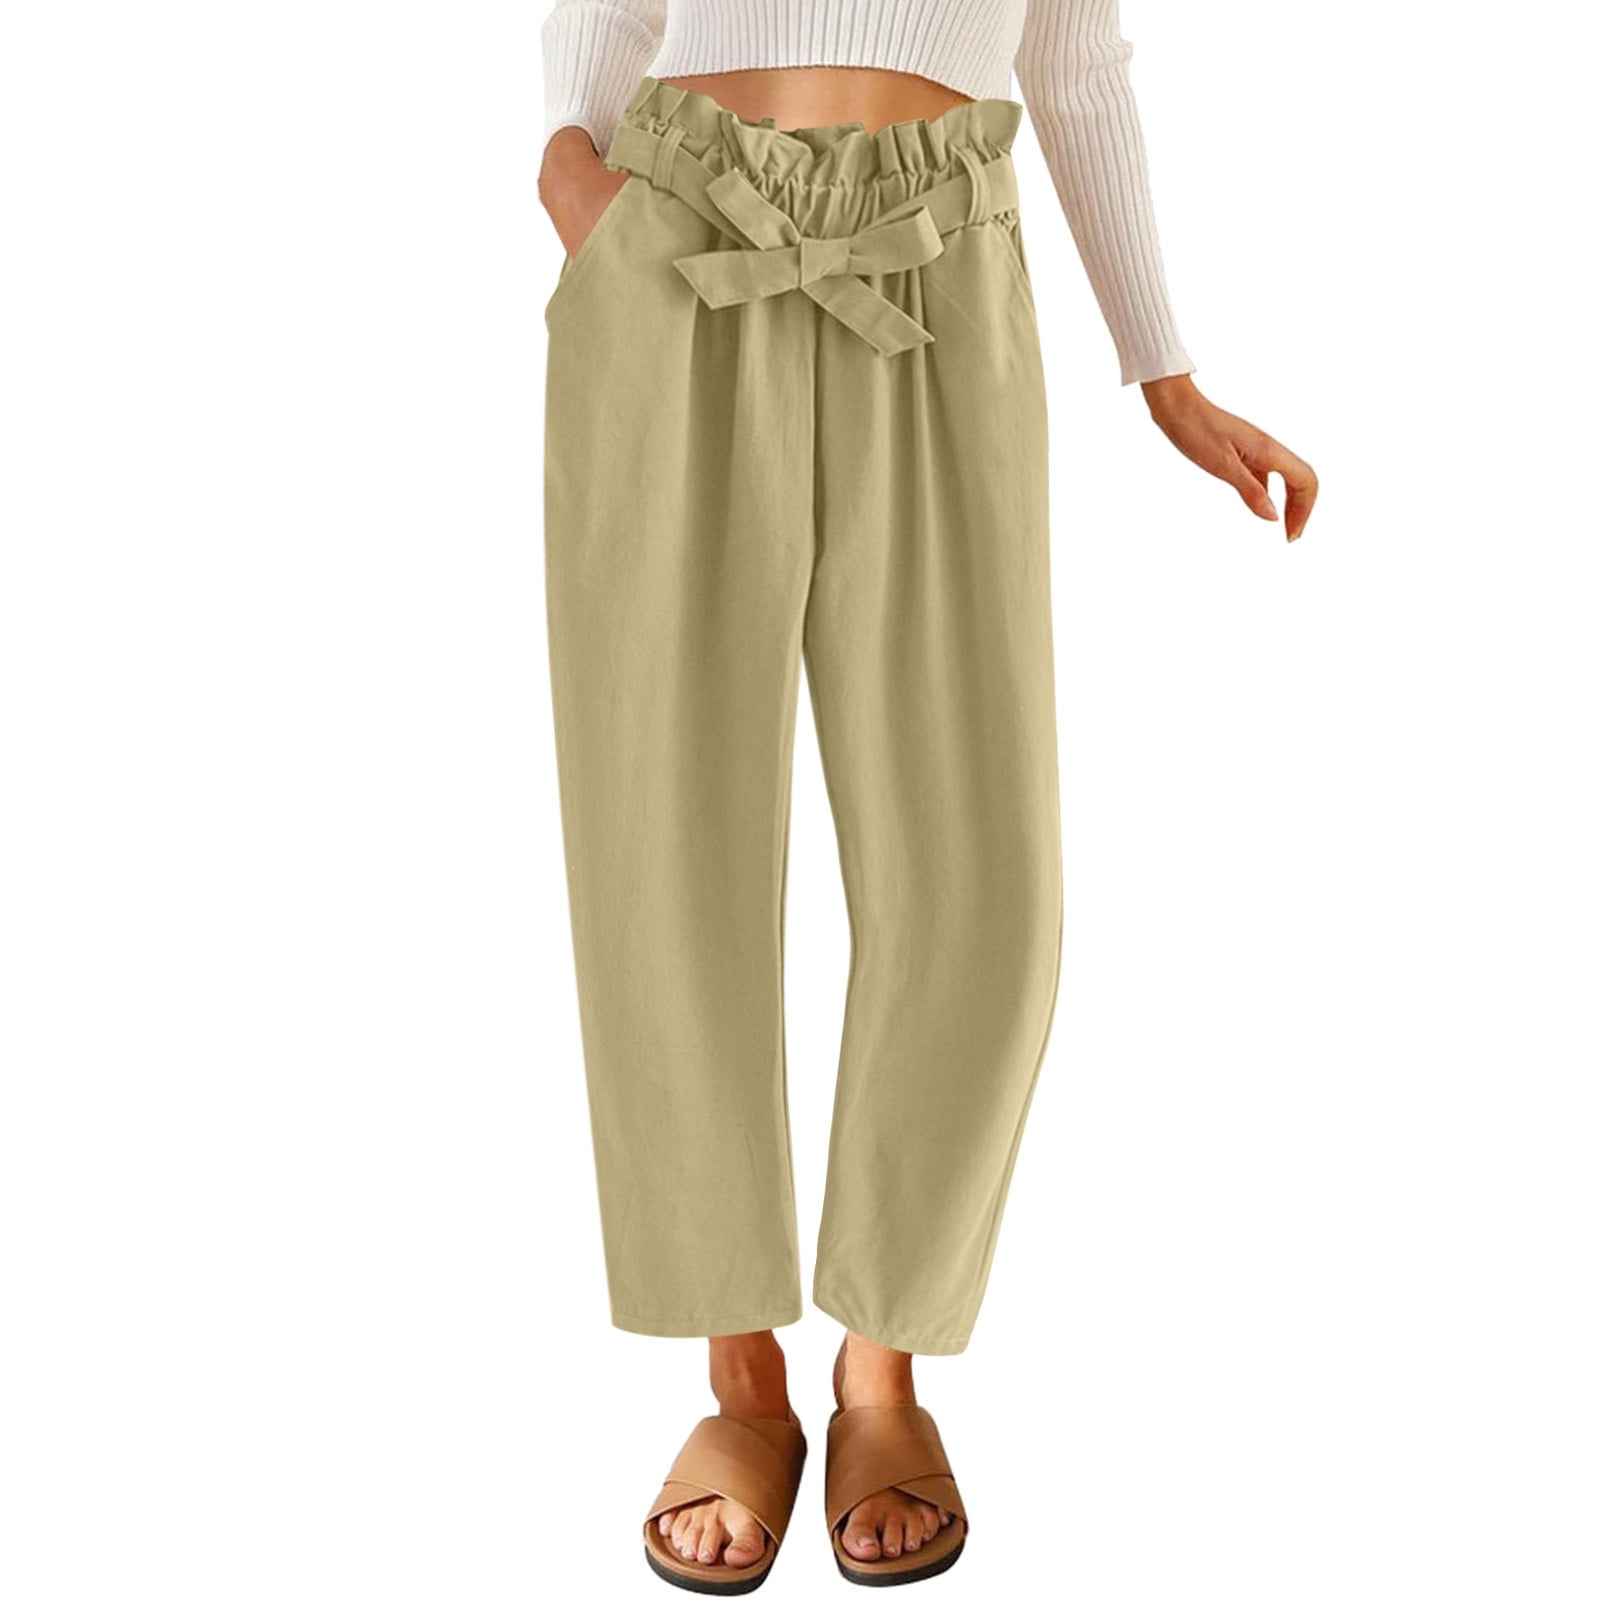 Wide Leg Pants for Women, Women'S Elastic High Waist Solid Color Casual  Loose Long Pants with Pockets  Sales And Deals Clearance Items Under  15 Dollars #4 